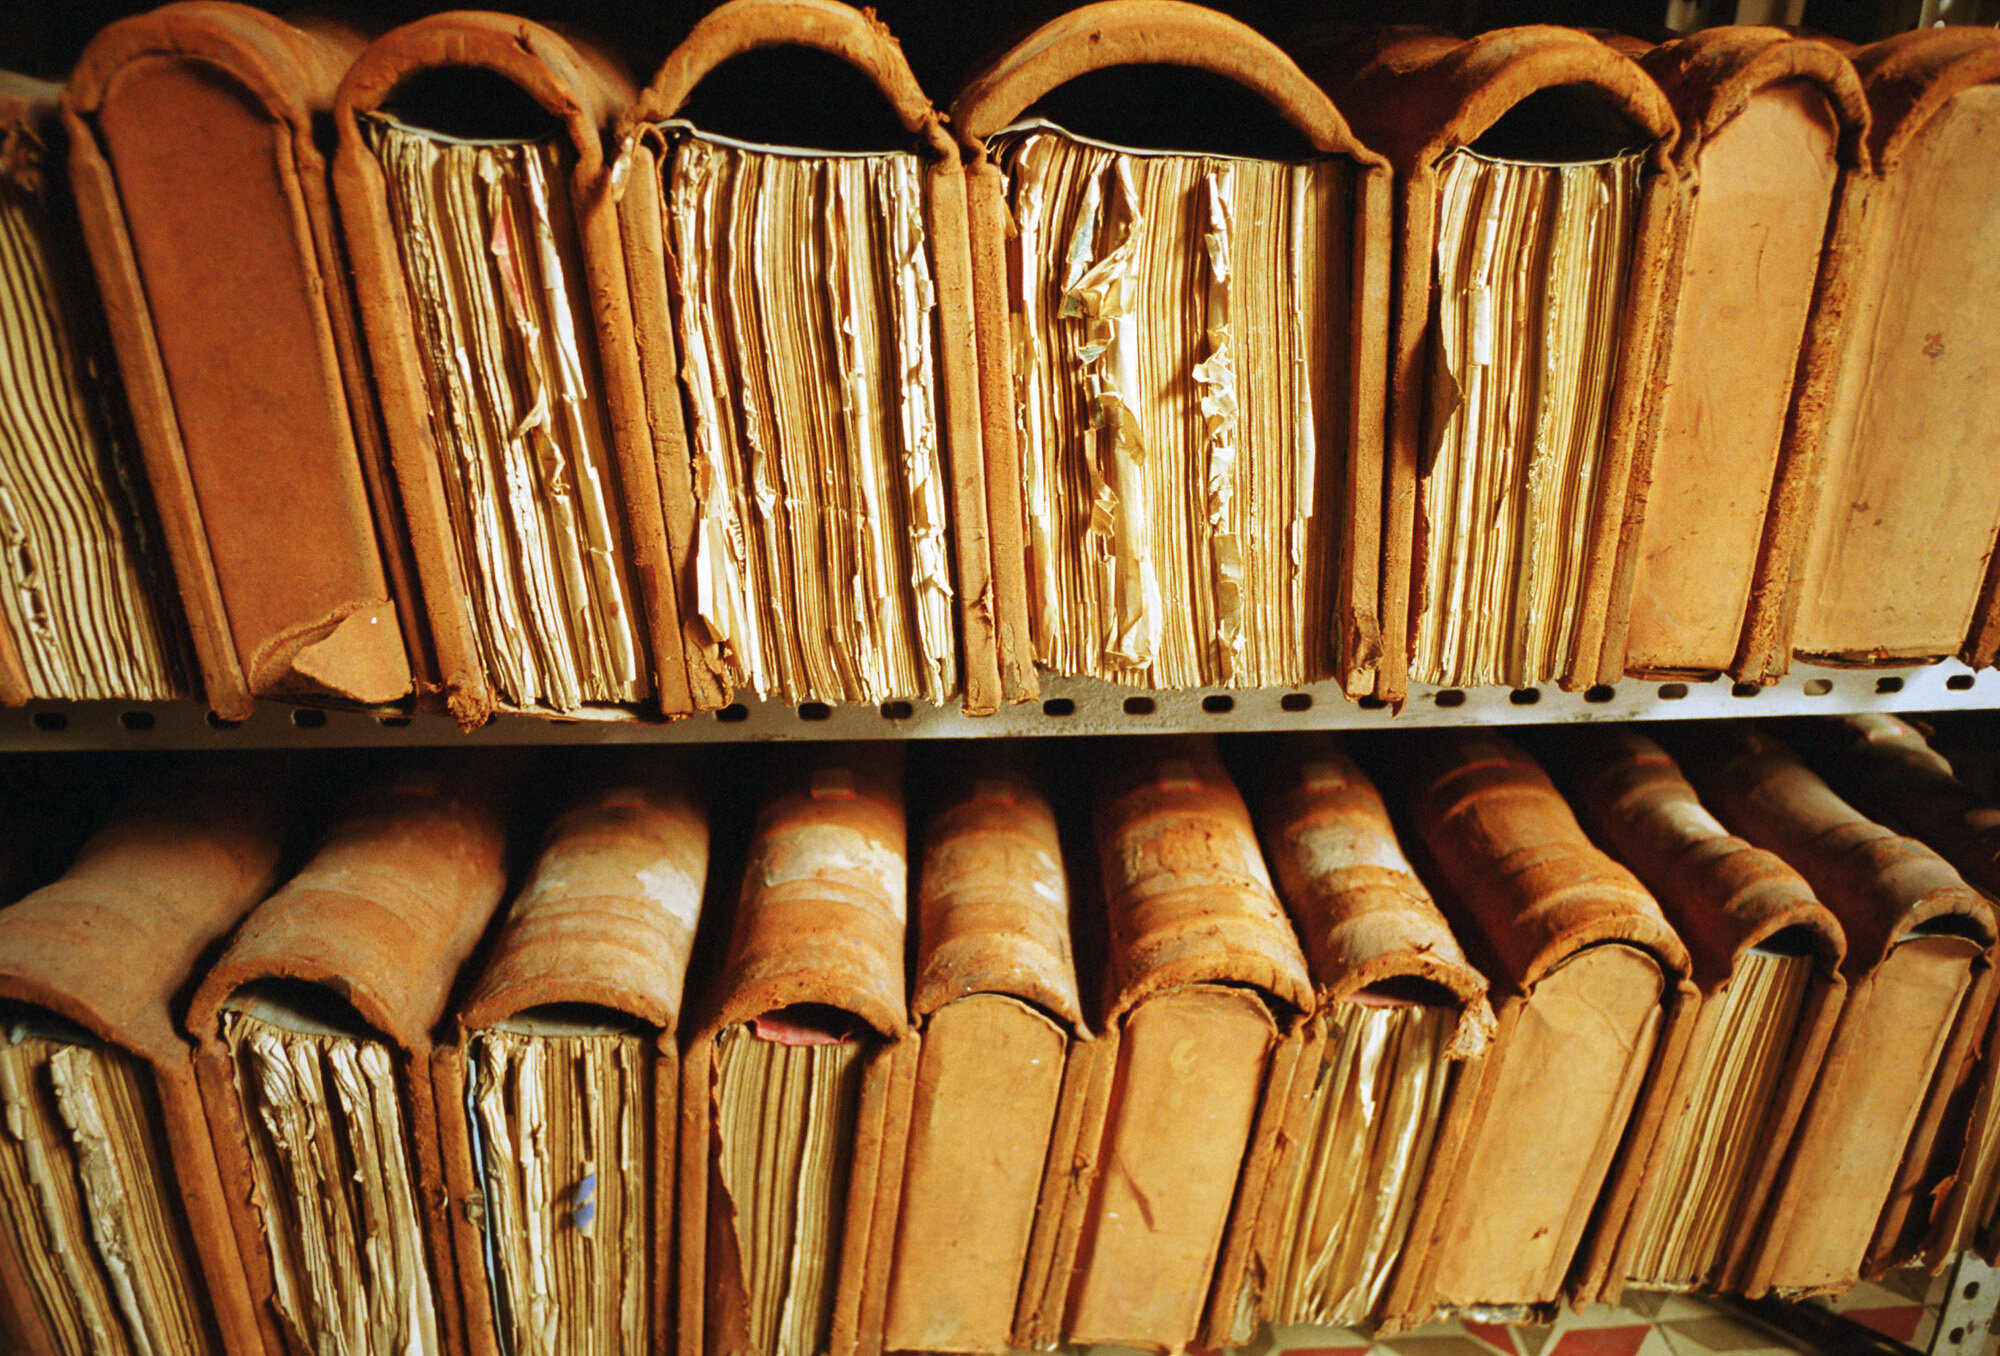  Documents in the General Archive  in Cienfuegos, Cuba. 
 